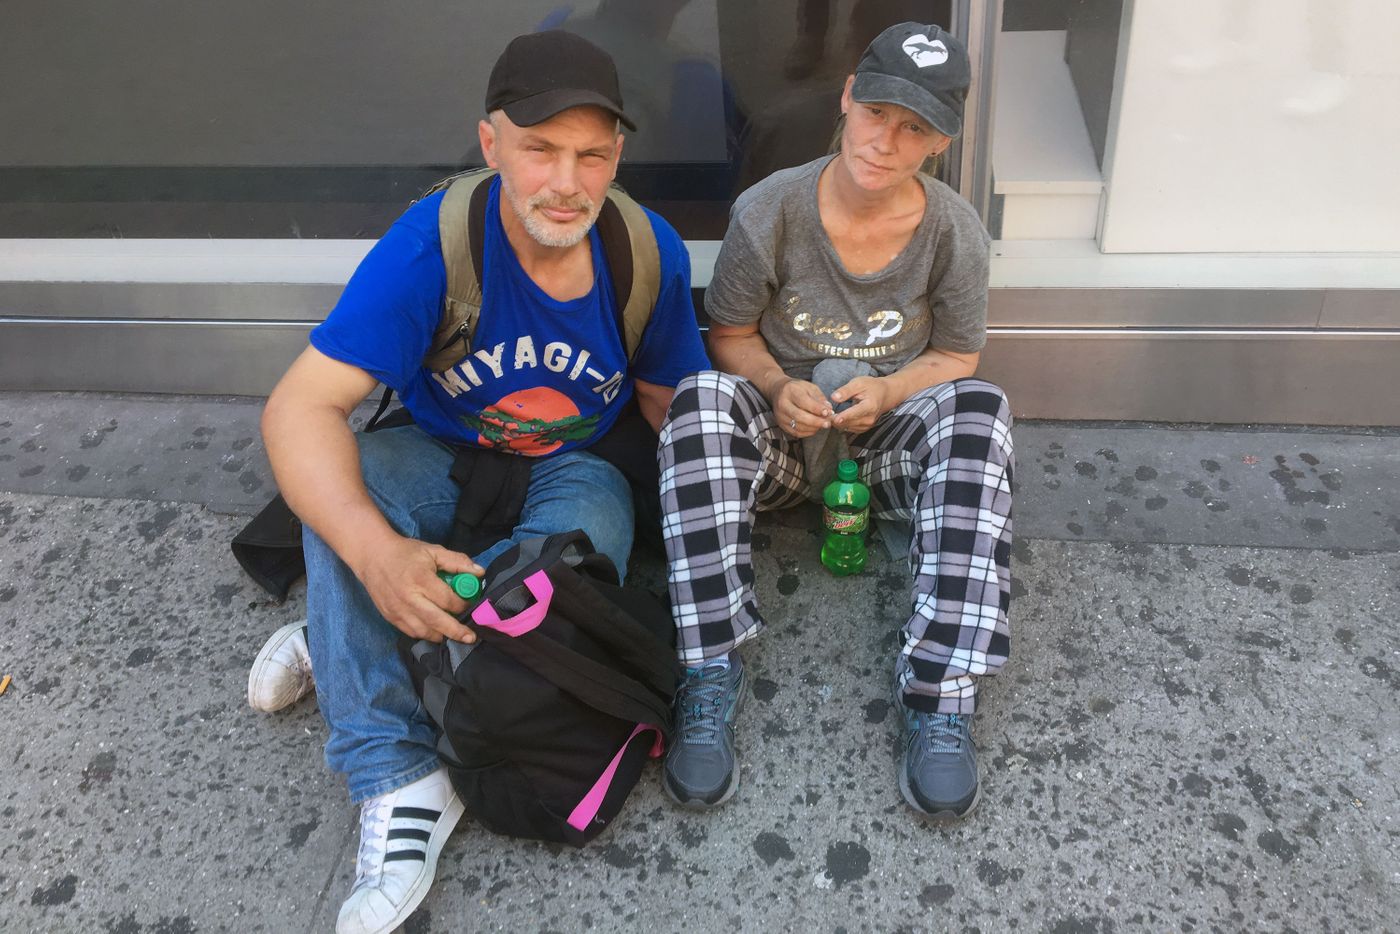 Todd Ackerman, 49, and his wife Tabatha, 45, say they’ve been living on the streets of New York for the last three years.